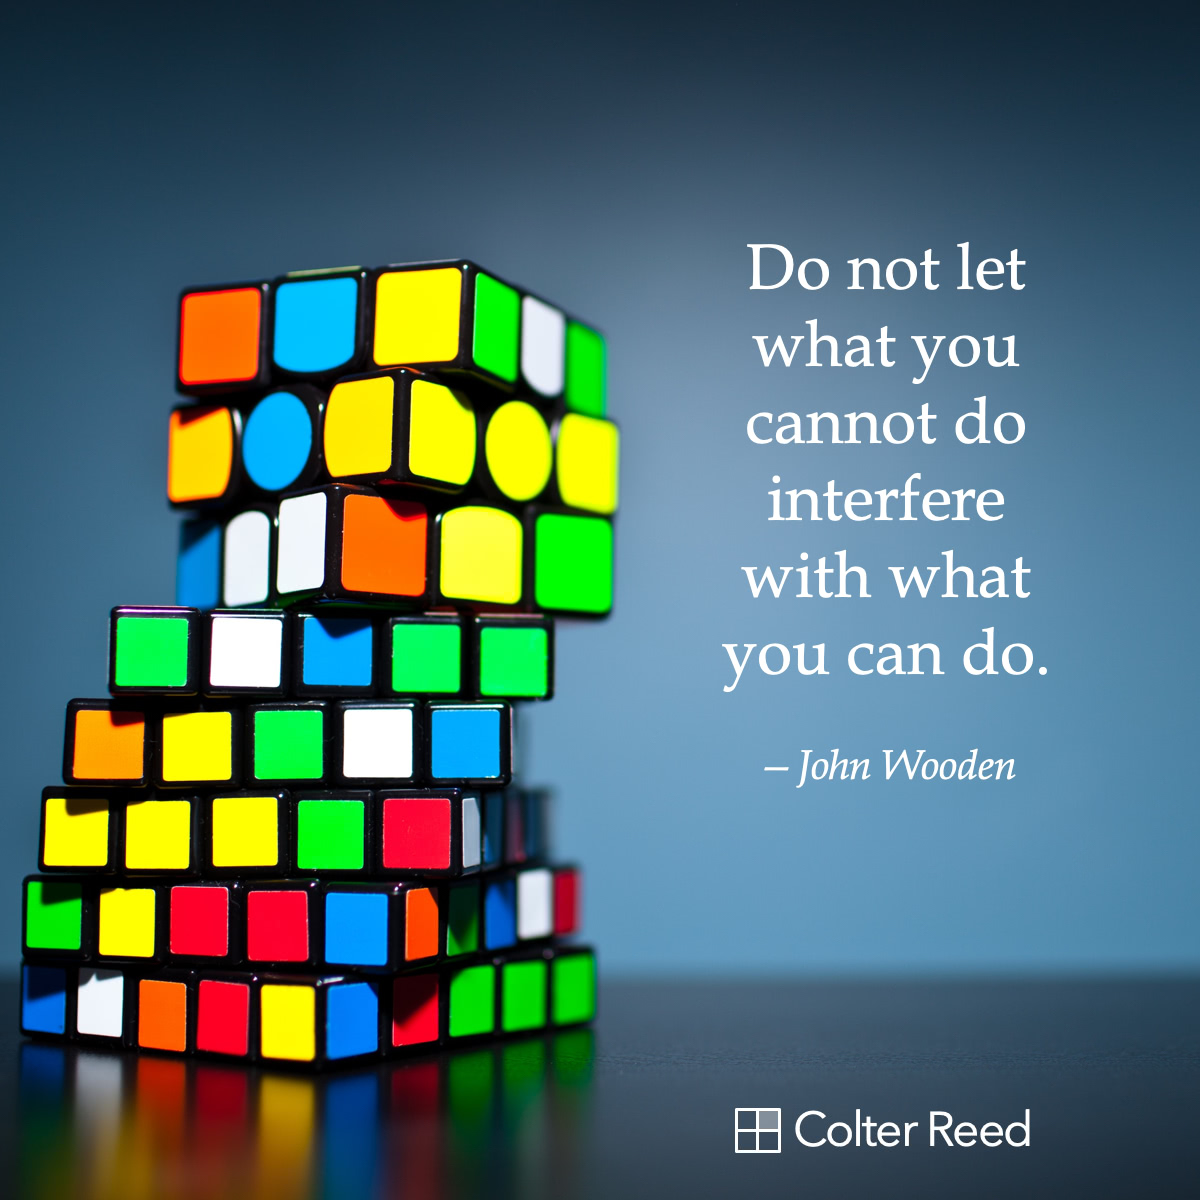 Do not let what you cannot do interfere with what you can do. —John Wooden